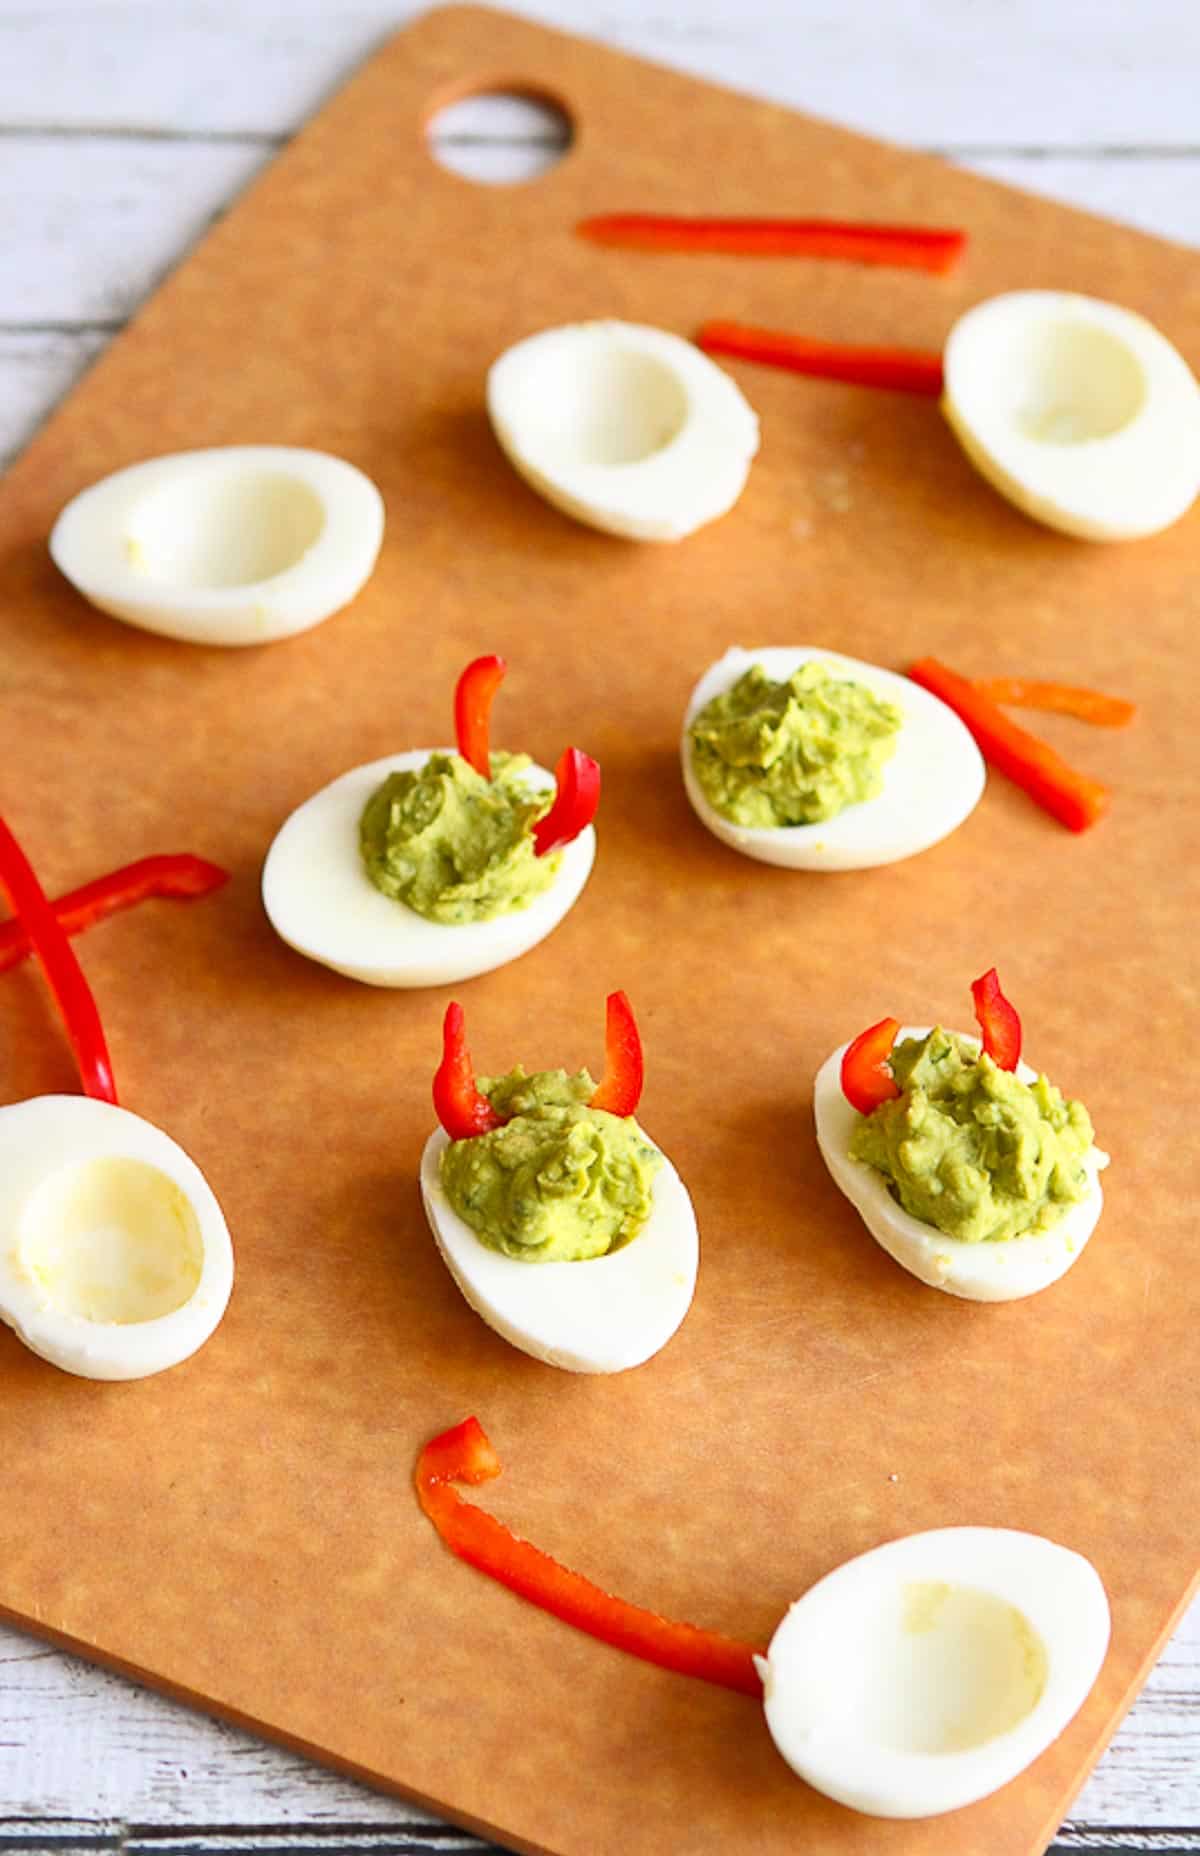 Deviled eggs with red pepper pieces, all on a cutting board.